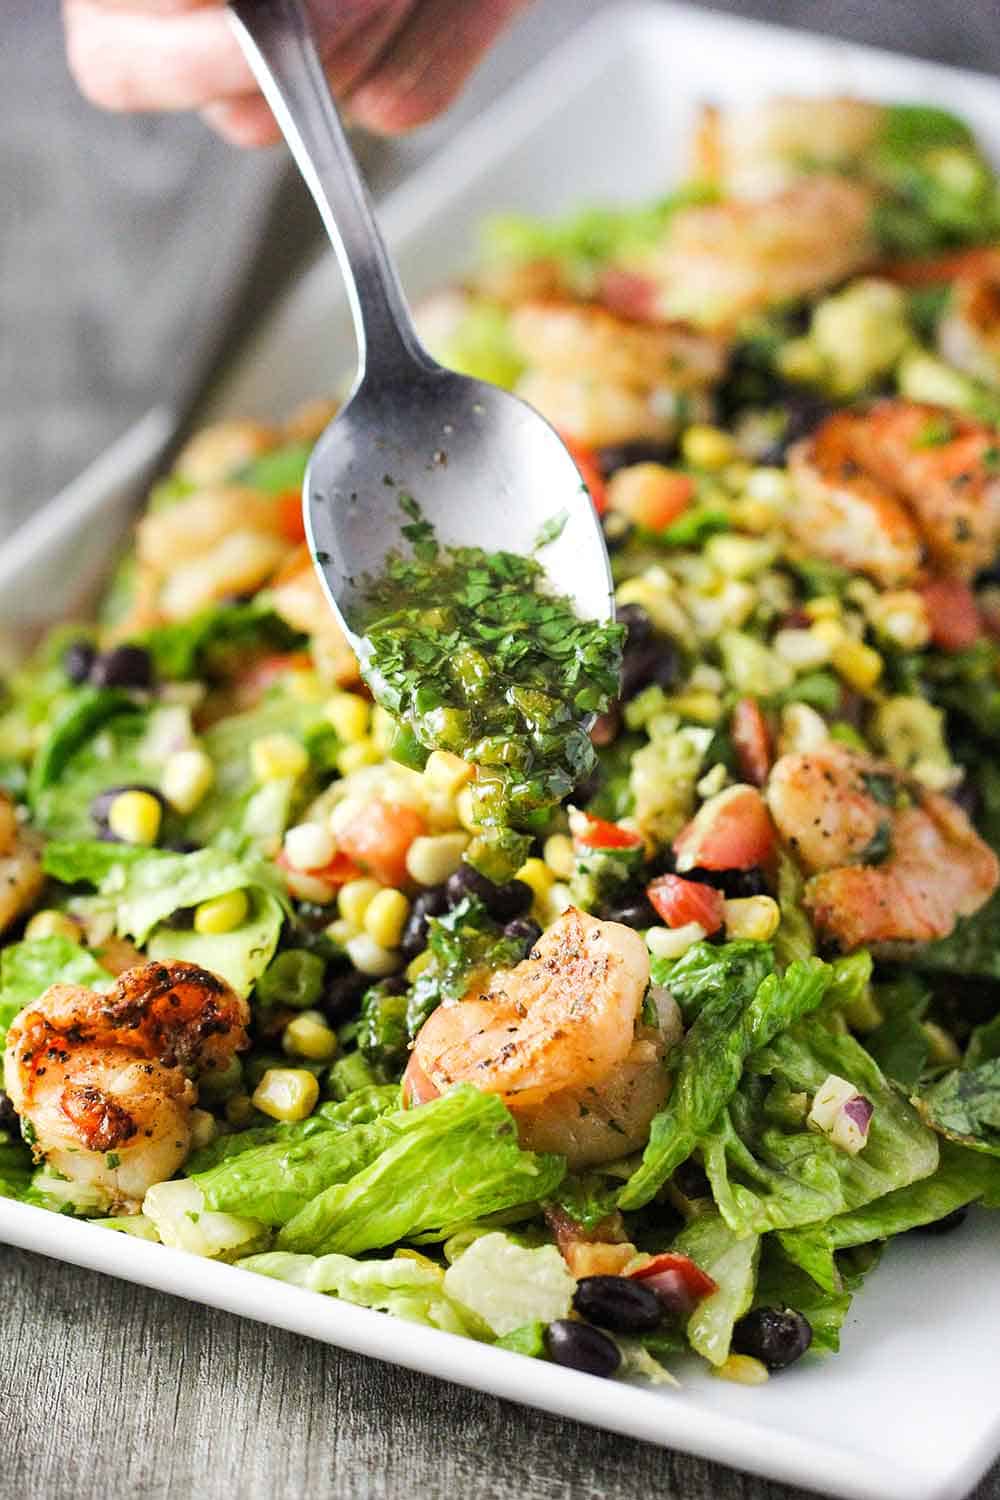 Use a spoon to drizzle the lime-cilantro dressing over the plated salad. 